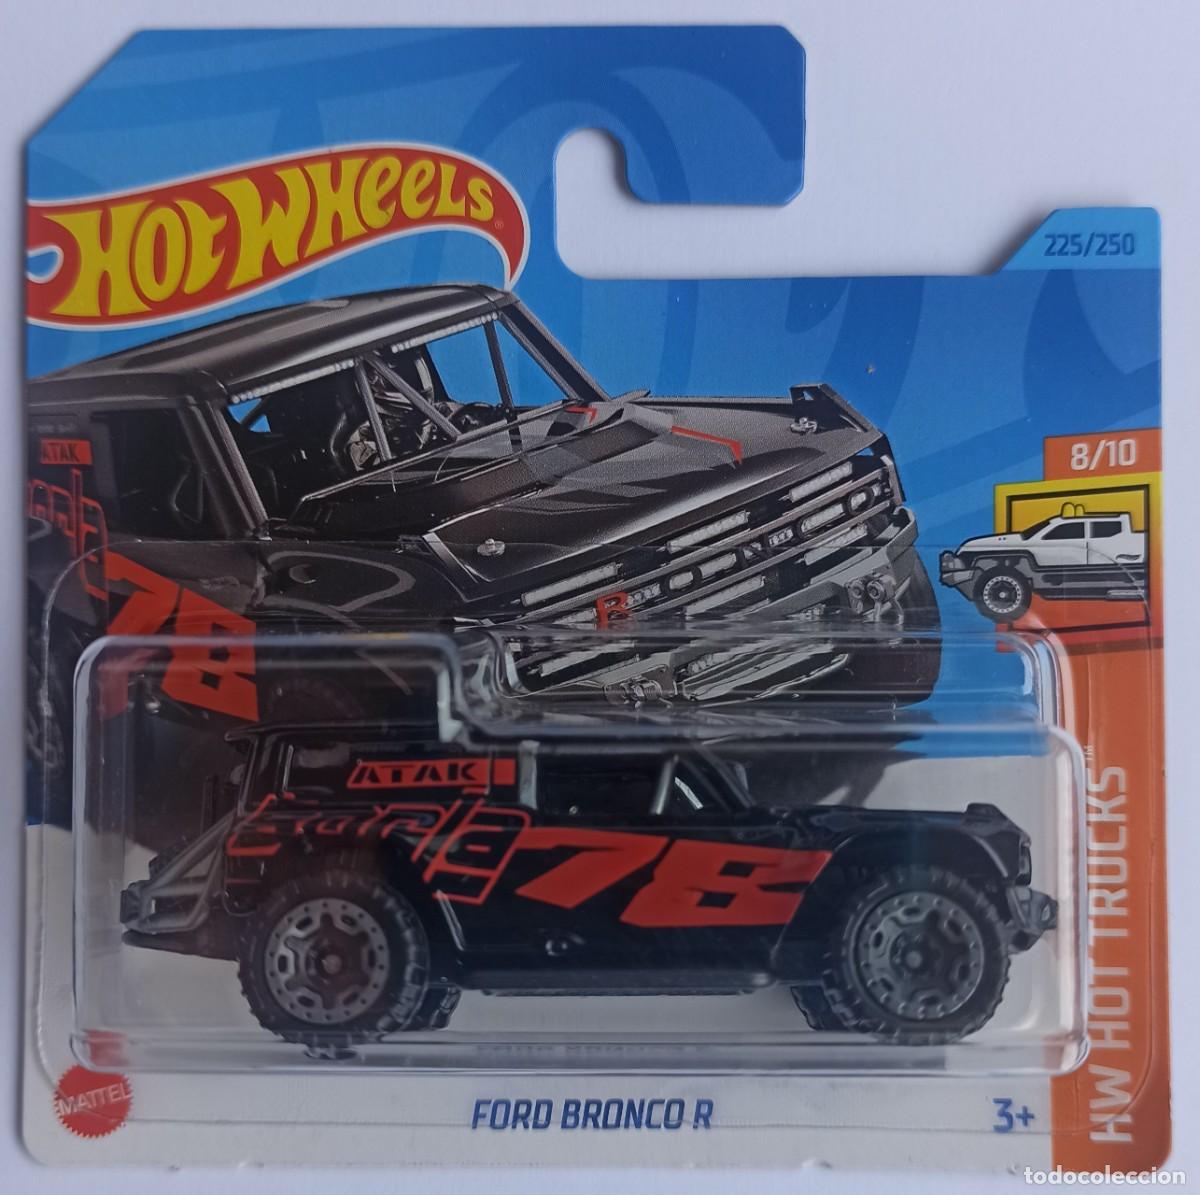 hot wheels ford bronco r. hw hot trucks 8/10 - Buy Model cars at other  scales on todocoleccion